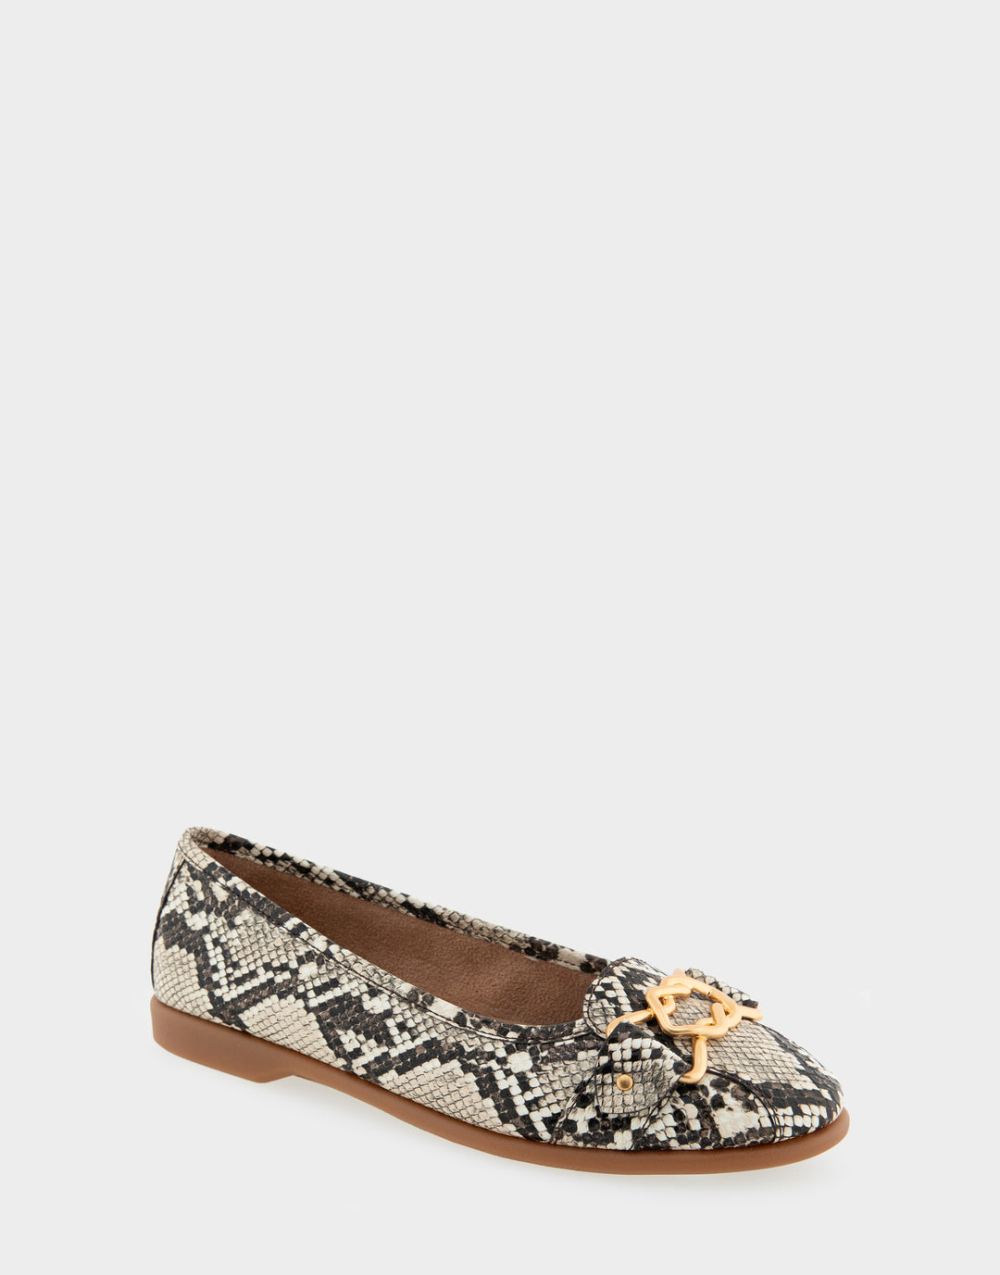 Women's | Bia Natural Printed Snake Faux Leather Ornamented Flat